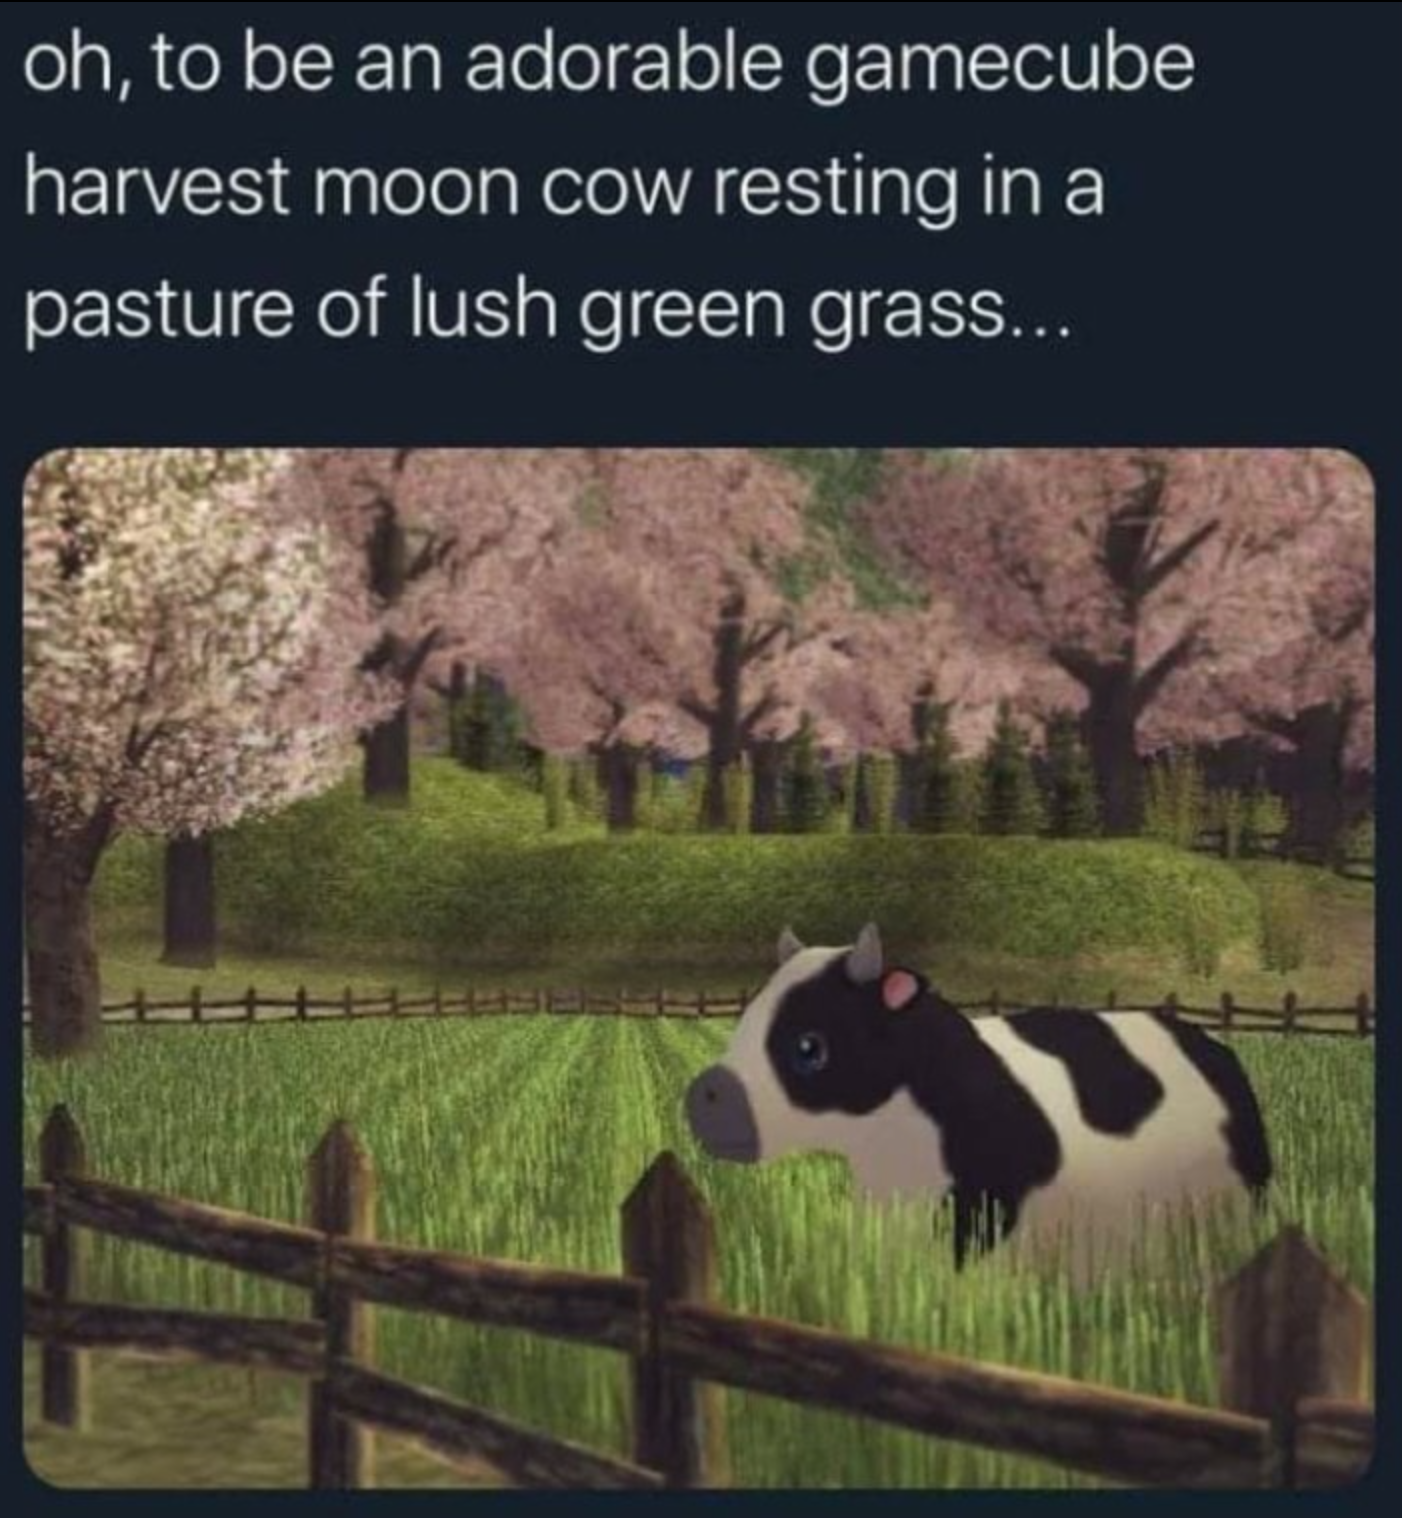 gamecube harvest moon cow - oh, to be an adorable gamecube harvest moon cow resting in a pasture of lush green grass...